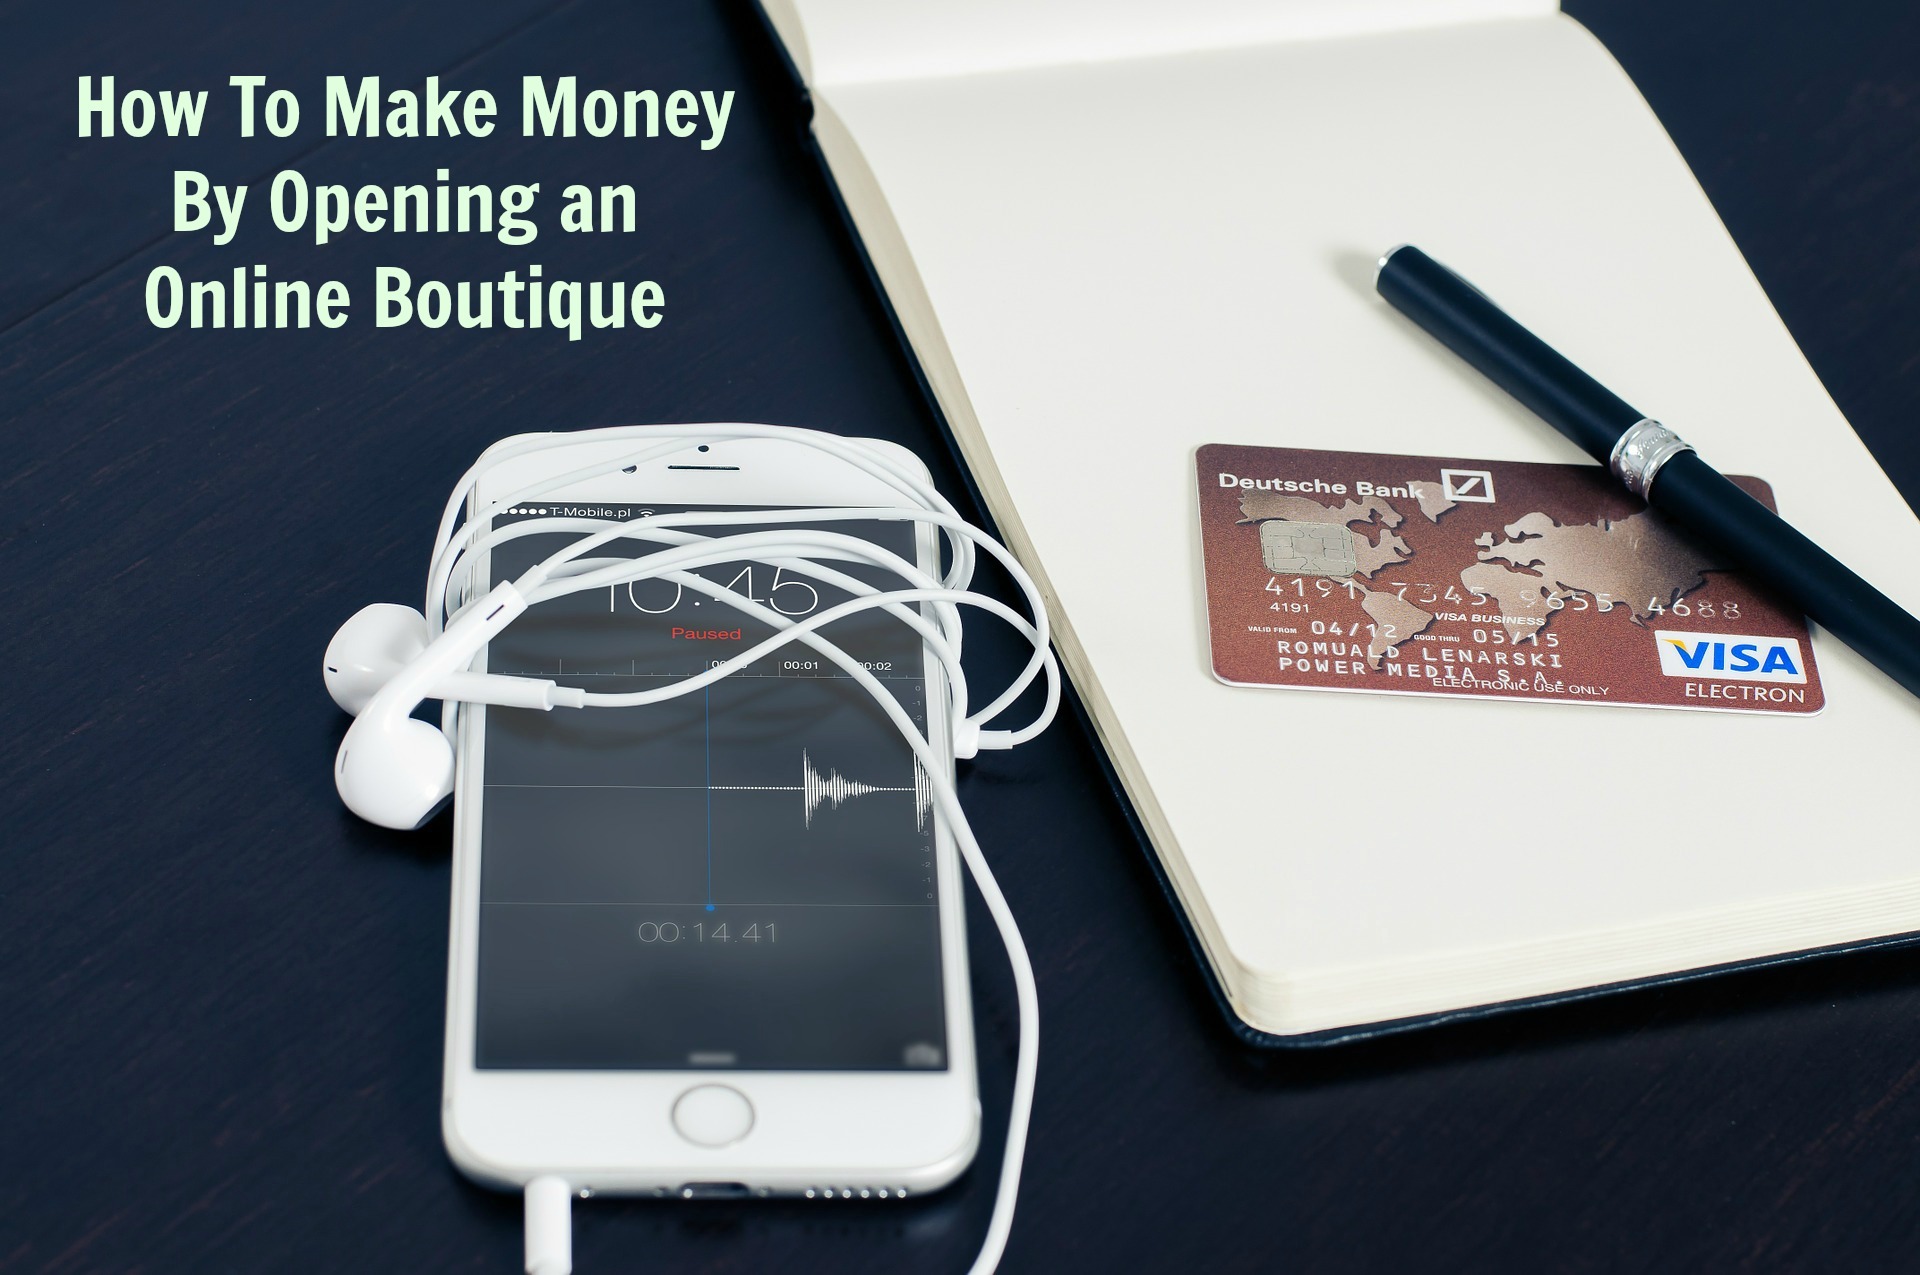 How To Make Money By Opening an Online Boutique